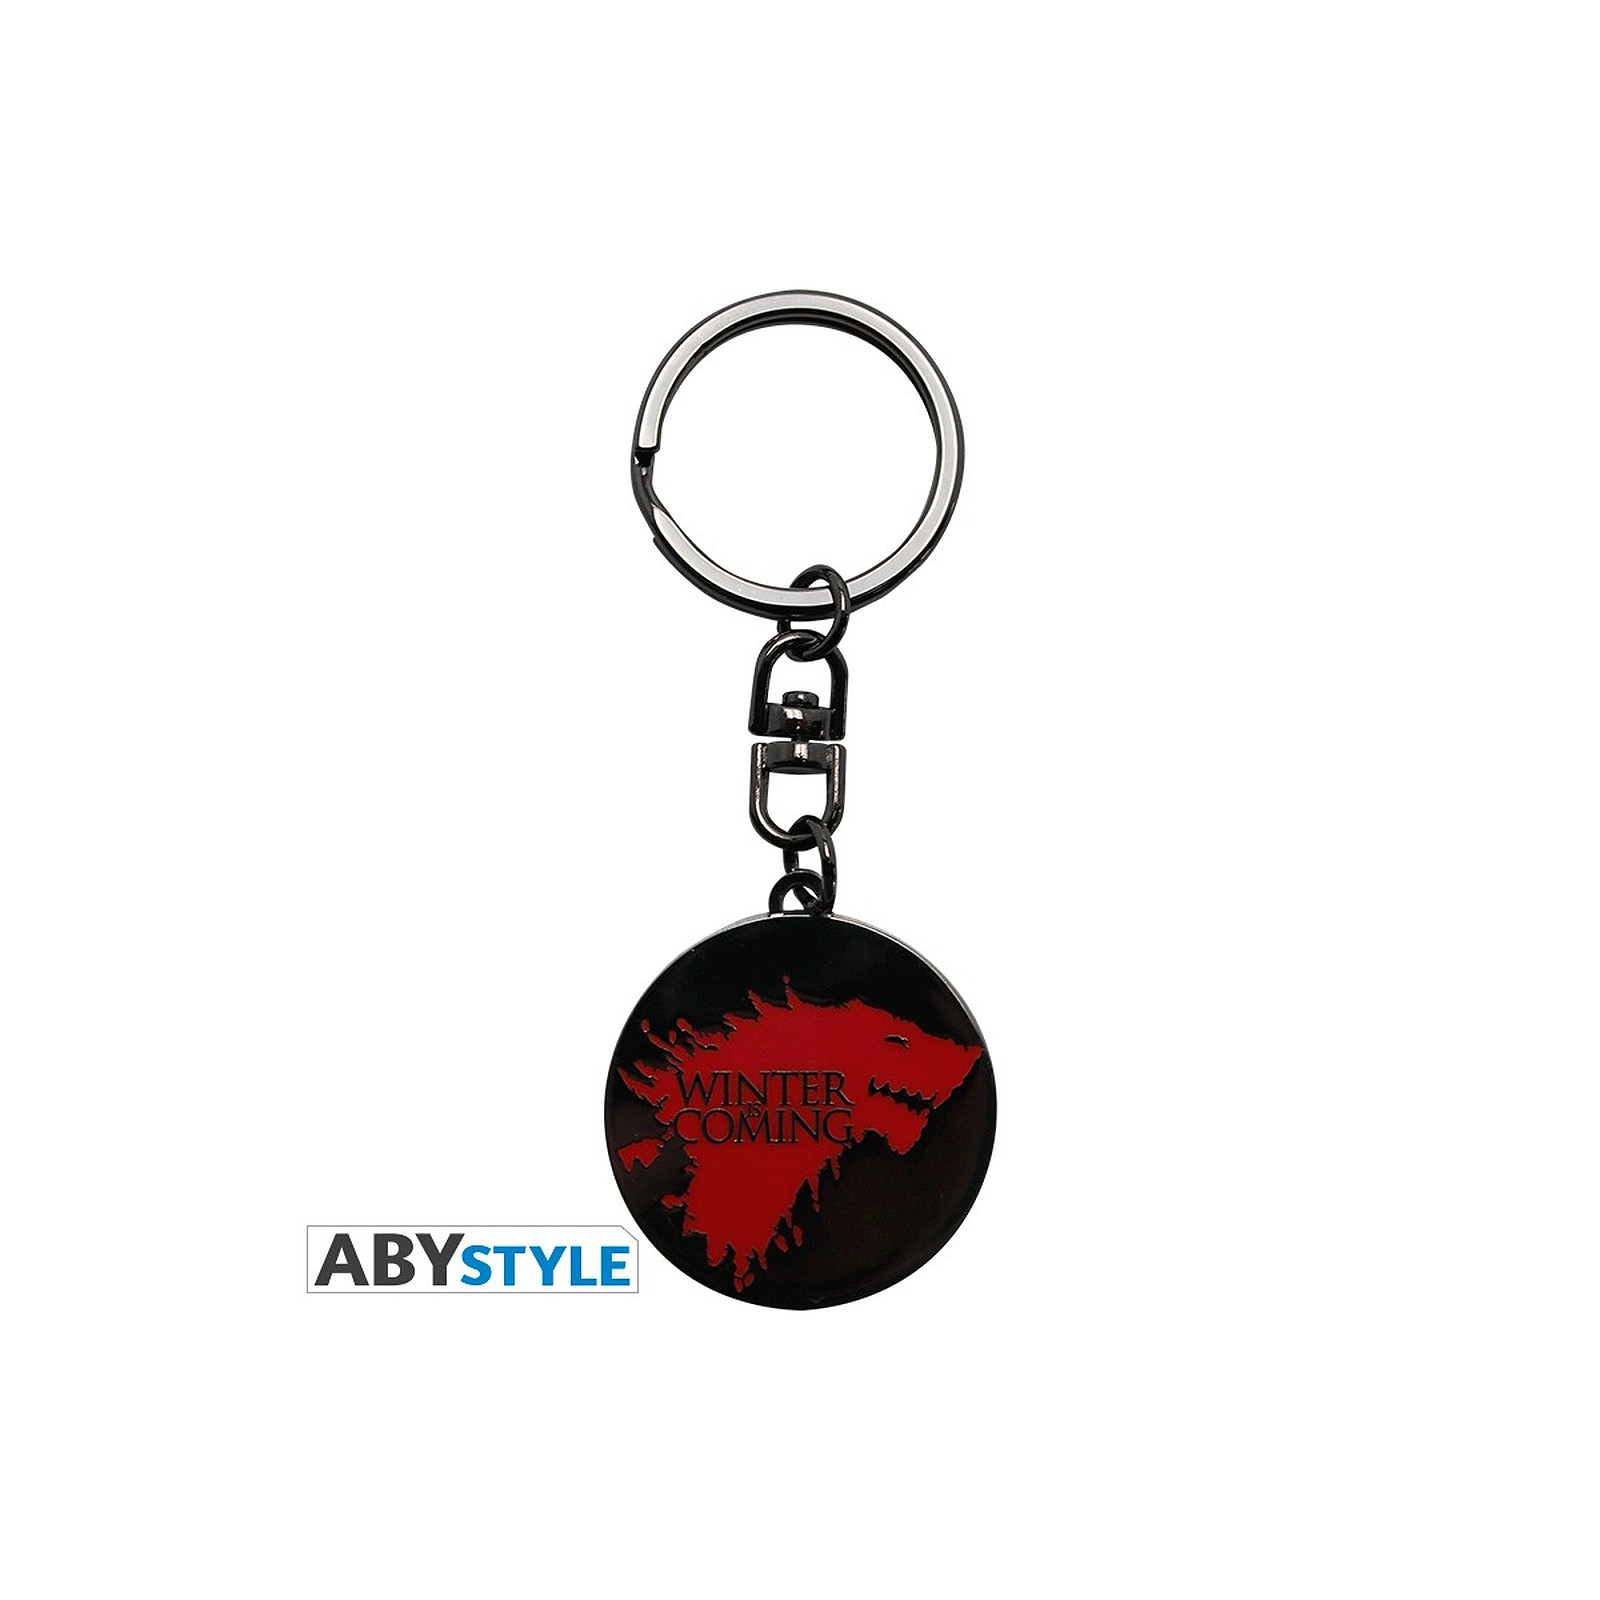 GAME OF THRONES - Porte-cles Winter is coming - Porte-cles Abystyle